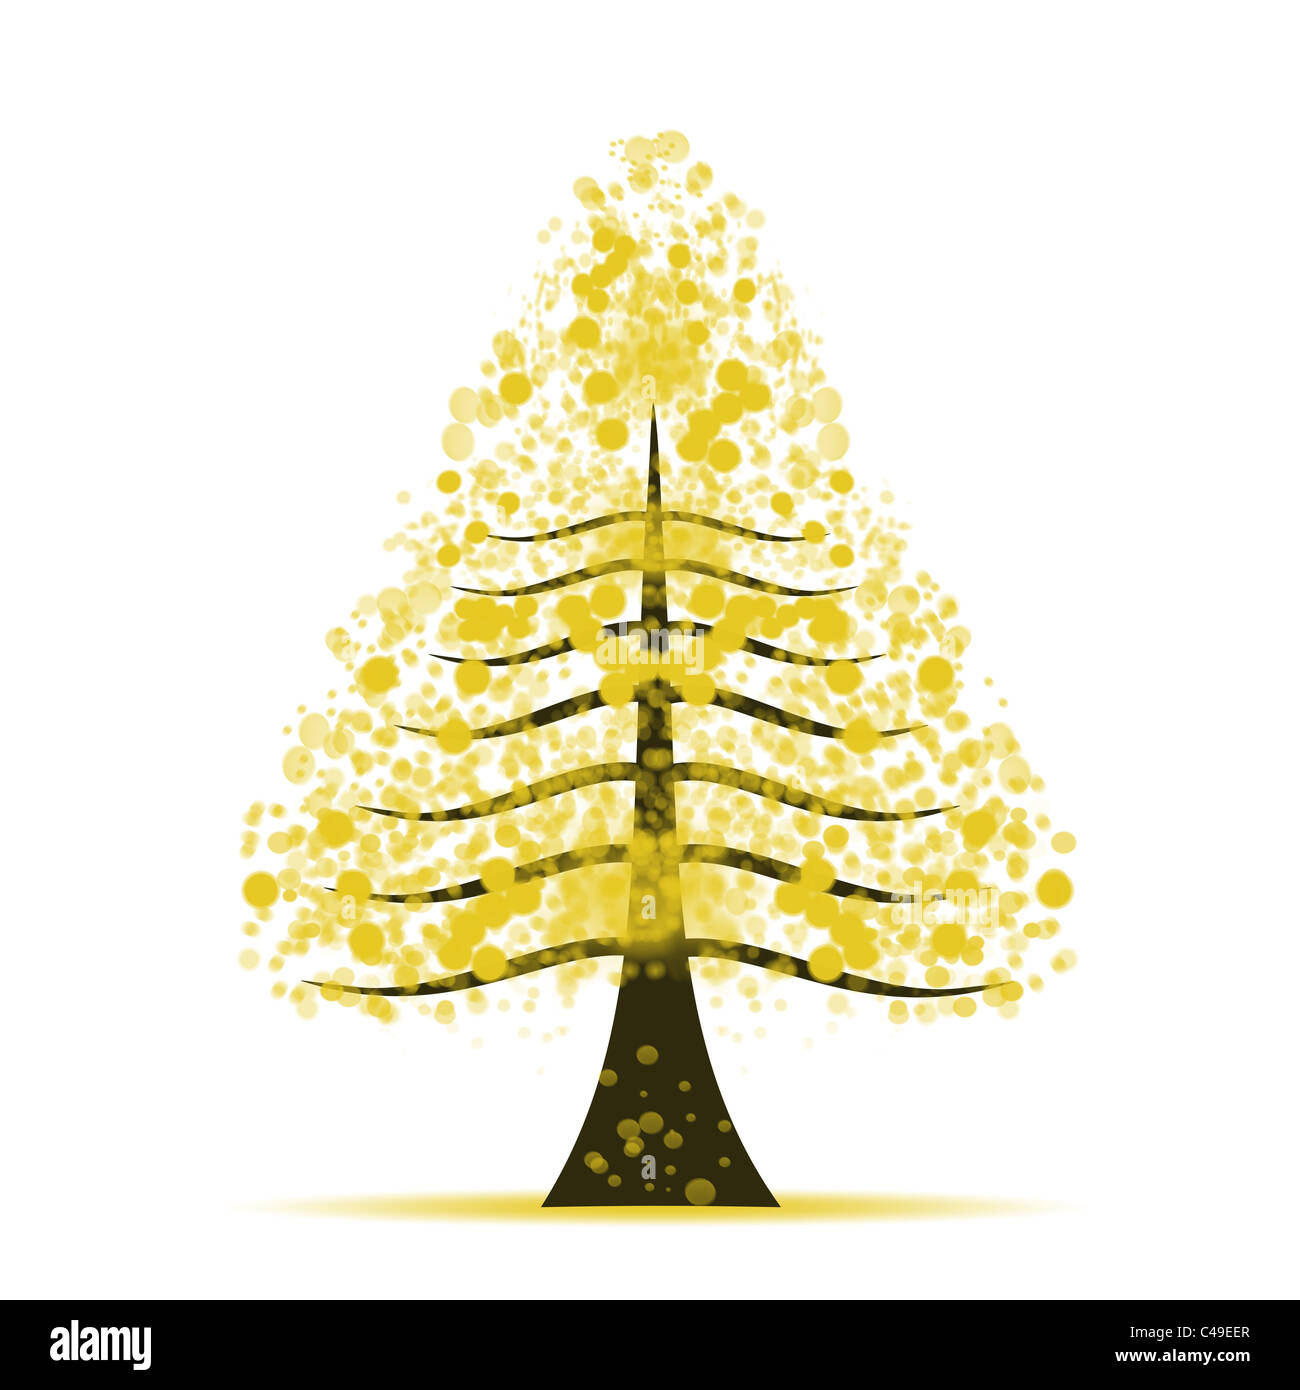 Abstract art tree of yellow leaves Stock Photo